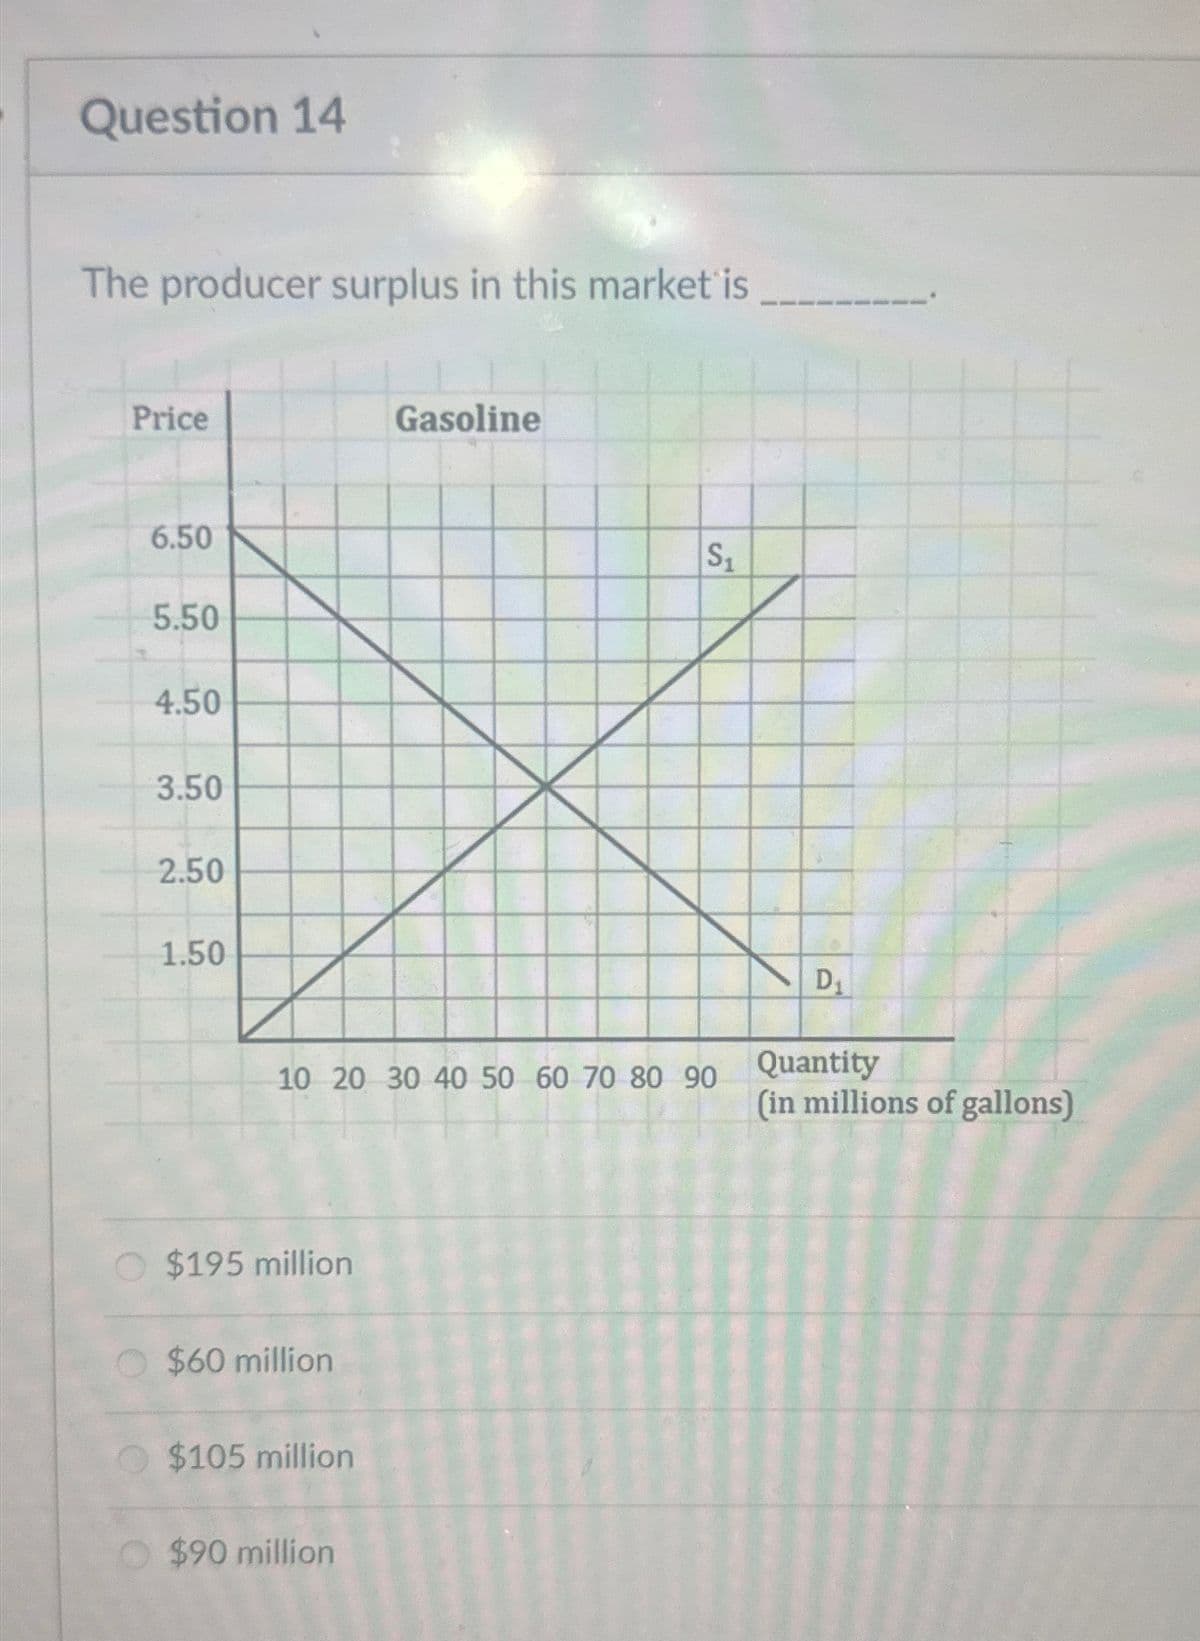 Question 14
The producer surplus in this market is
Price
Gasoline
6.50
5.50
4.50
3.50
2.50
1.50
S1
10 20 30 40 50 60 70 80 90
D1
Quantity
(in millions of gallons)
$195 million
$60 million
$105 million
$90 million